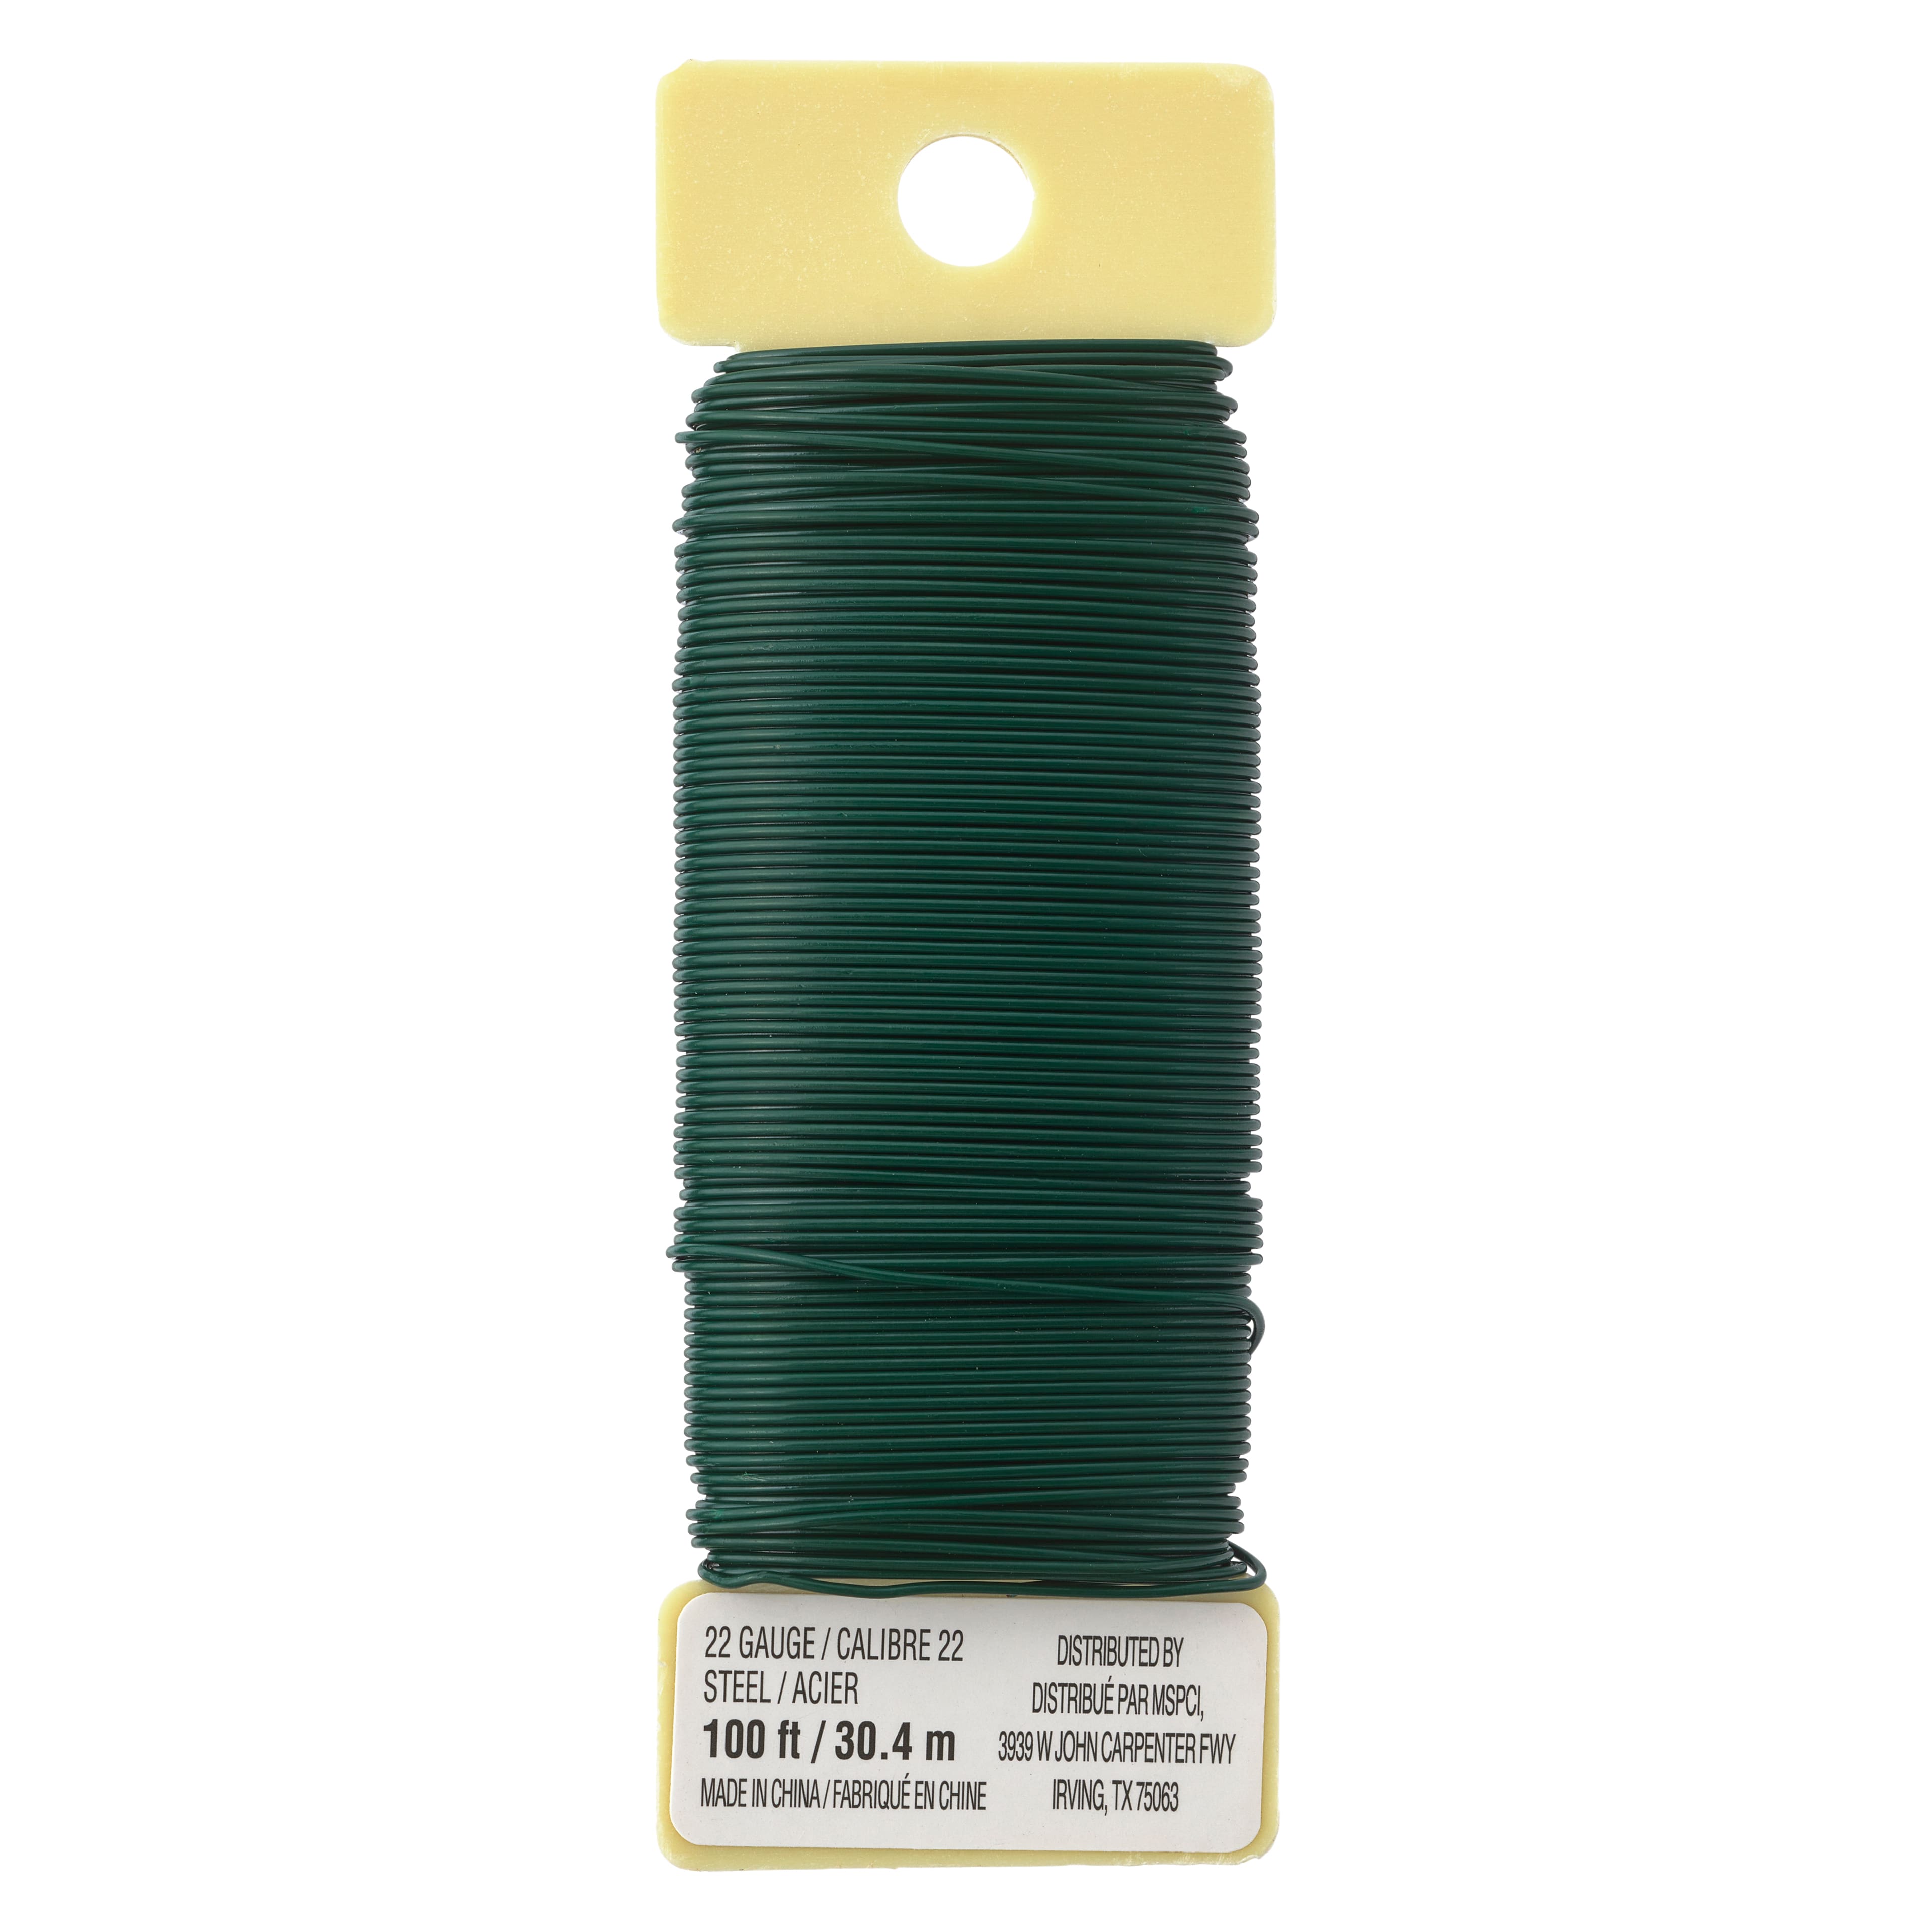 HAHIYO 22Gauge Green 1Rolls Total 38yards(115feet) Metal Floral Wire  Flexible Paddle Wire Florist Wire Garden Wire for Crafts Christmas Wreaths  Tree